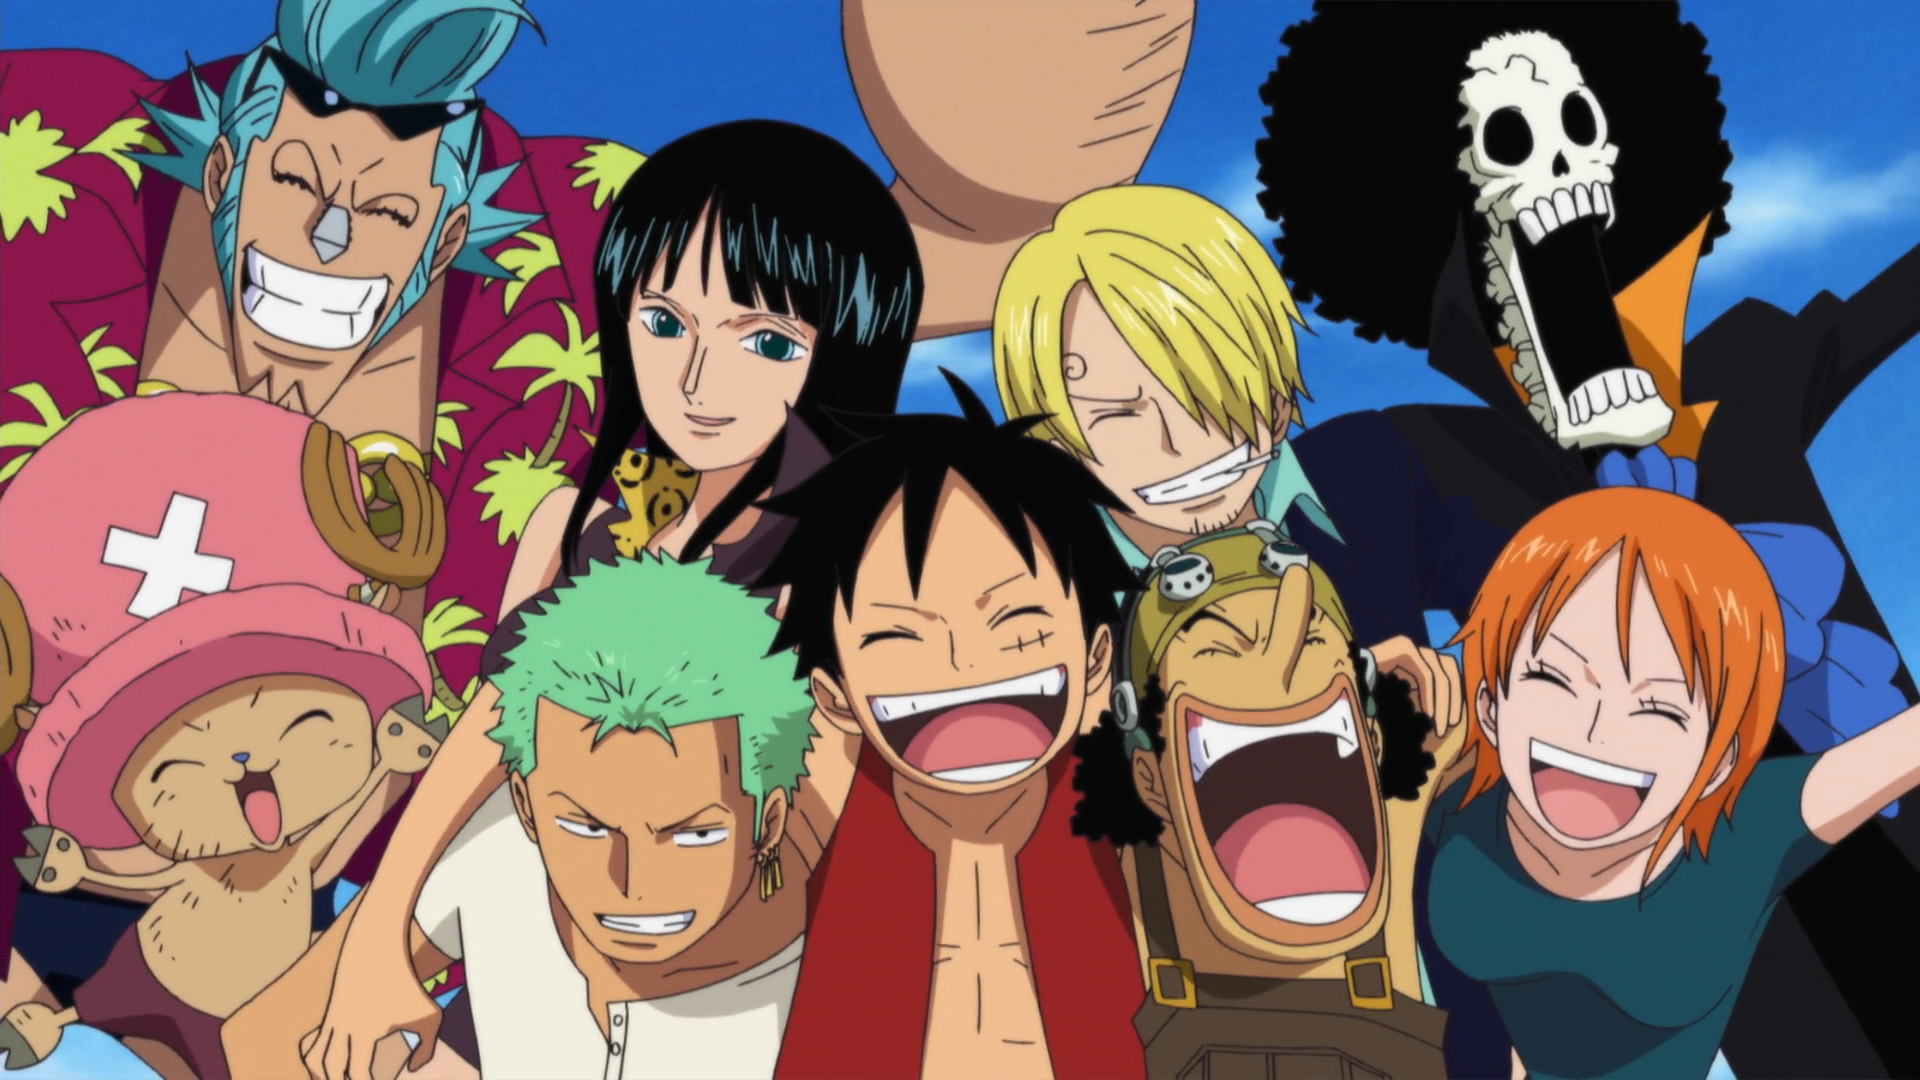 http://vignette4.wikia.nocookie.net/onepiece/images/8/8a/Straw_Hat_Pirates_as_a_Family.png/revision/latest?cb=20130722115116